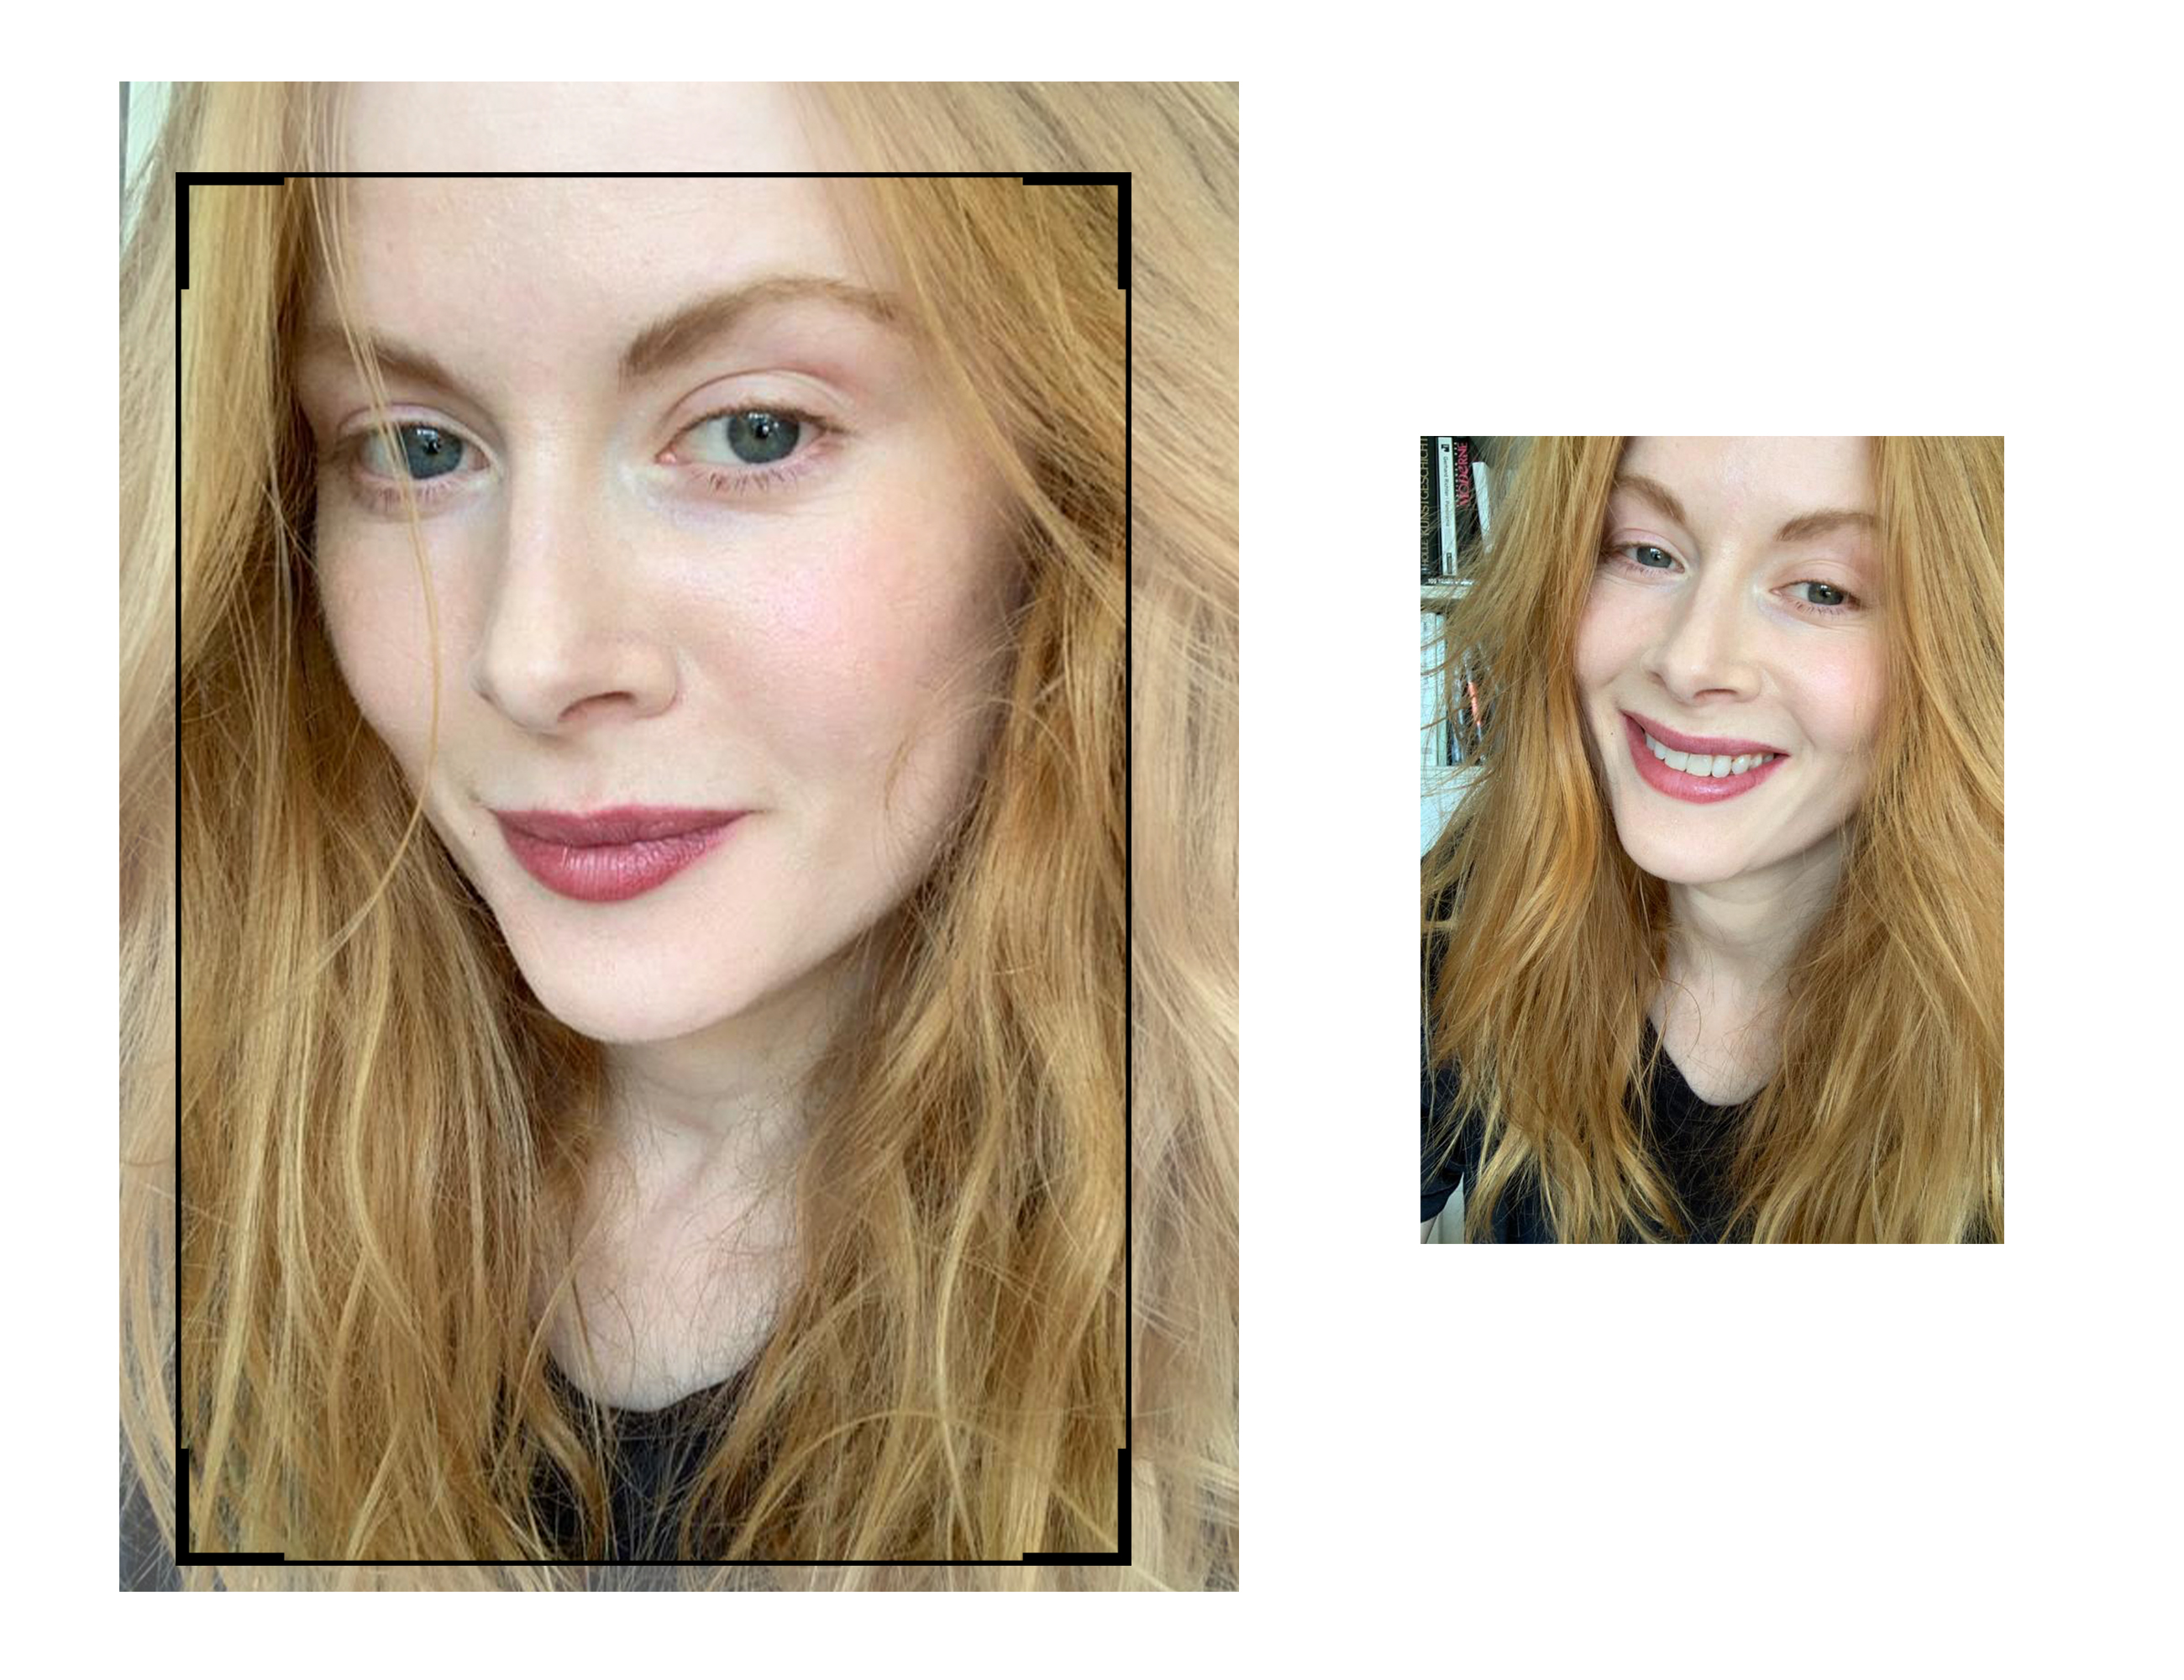 Unfiltered beauty chat with Emily Beecham